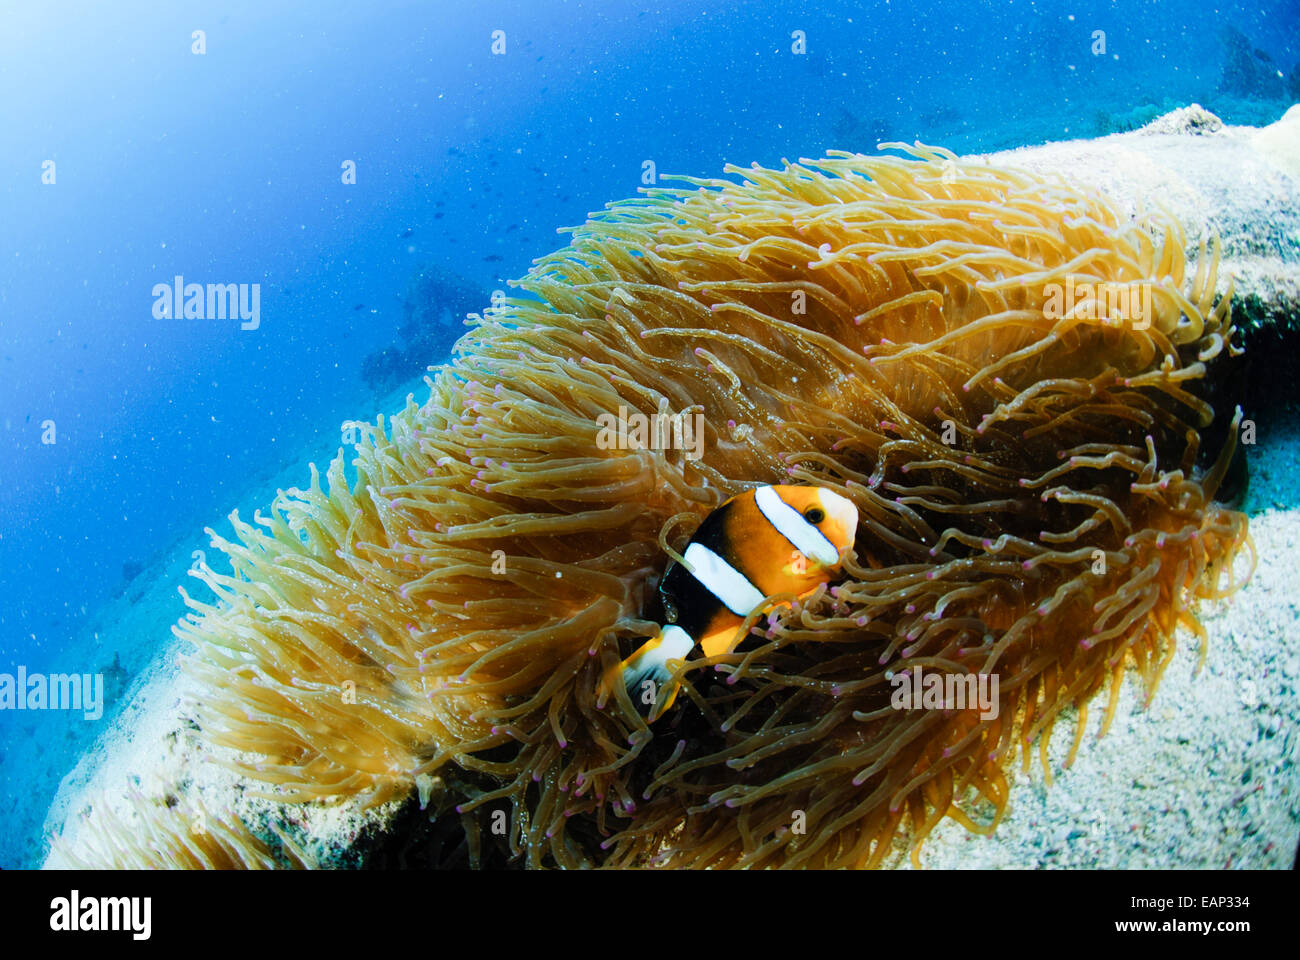 Reef Barrieri anemonfish - Amphiprion akindynos - Moalboal - Cebu - Philipphines - Pacifici Ocean Banque D'Images